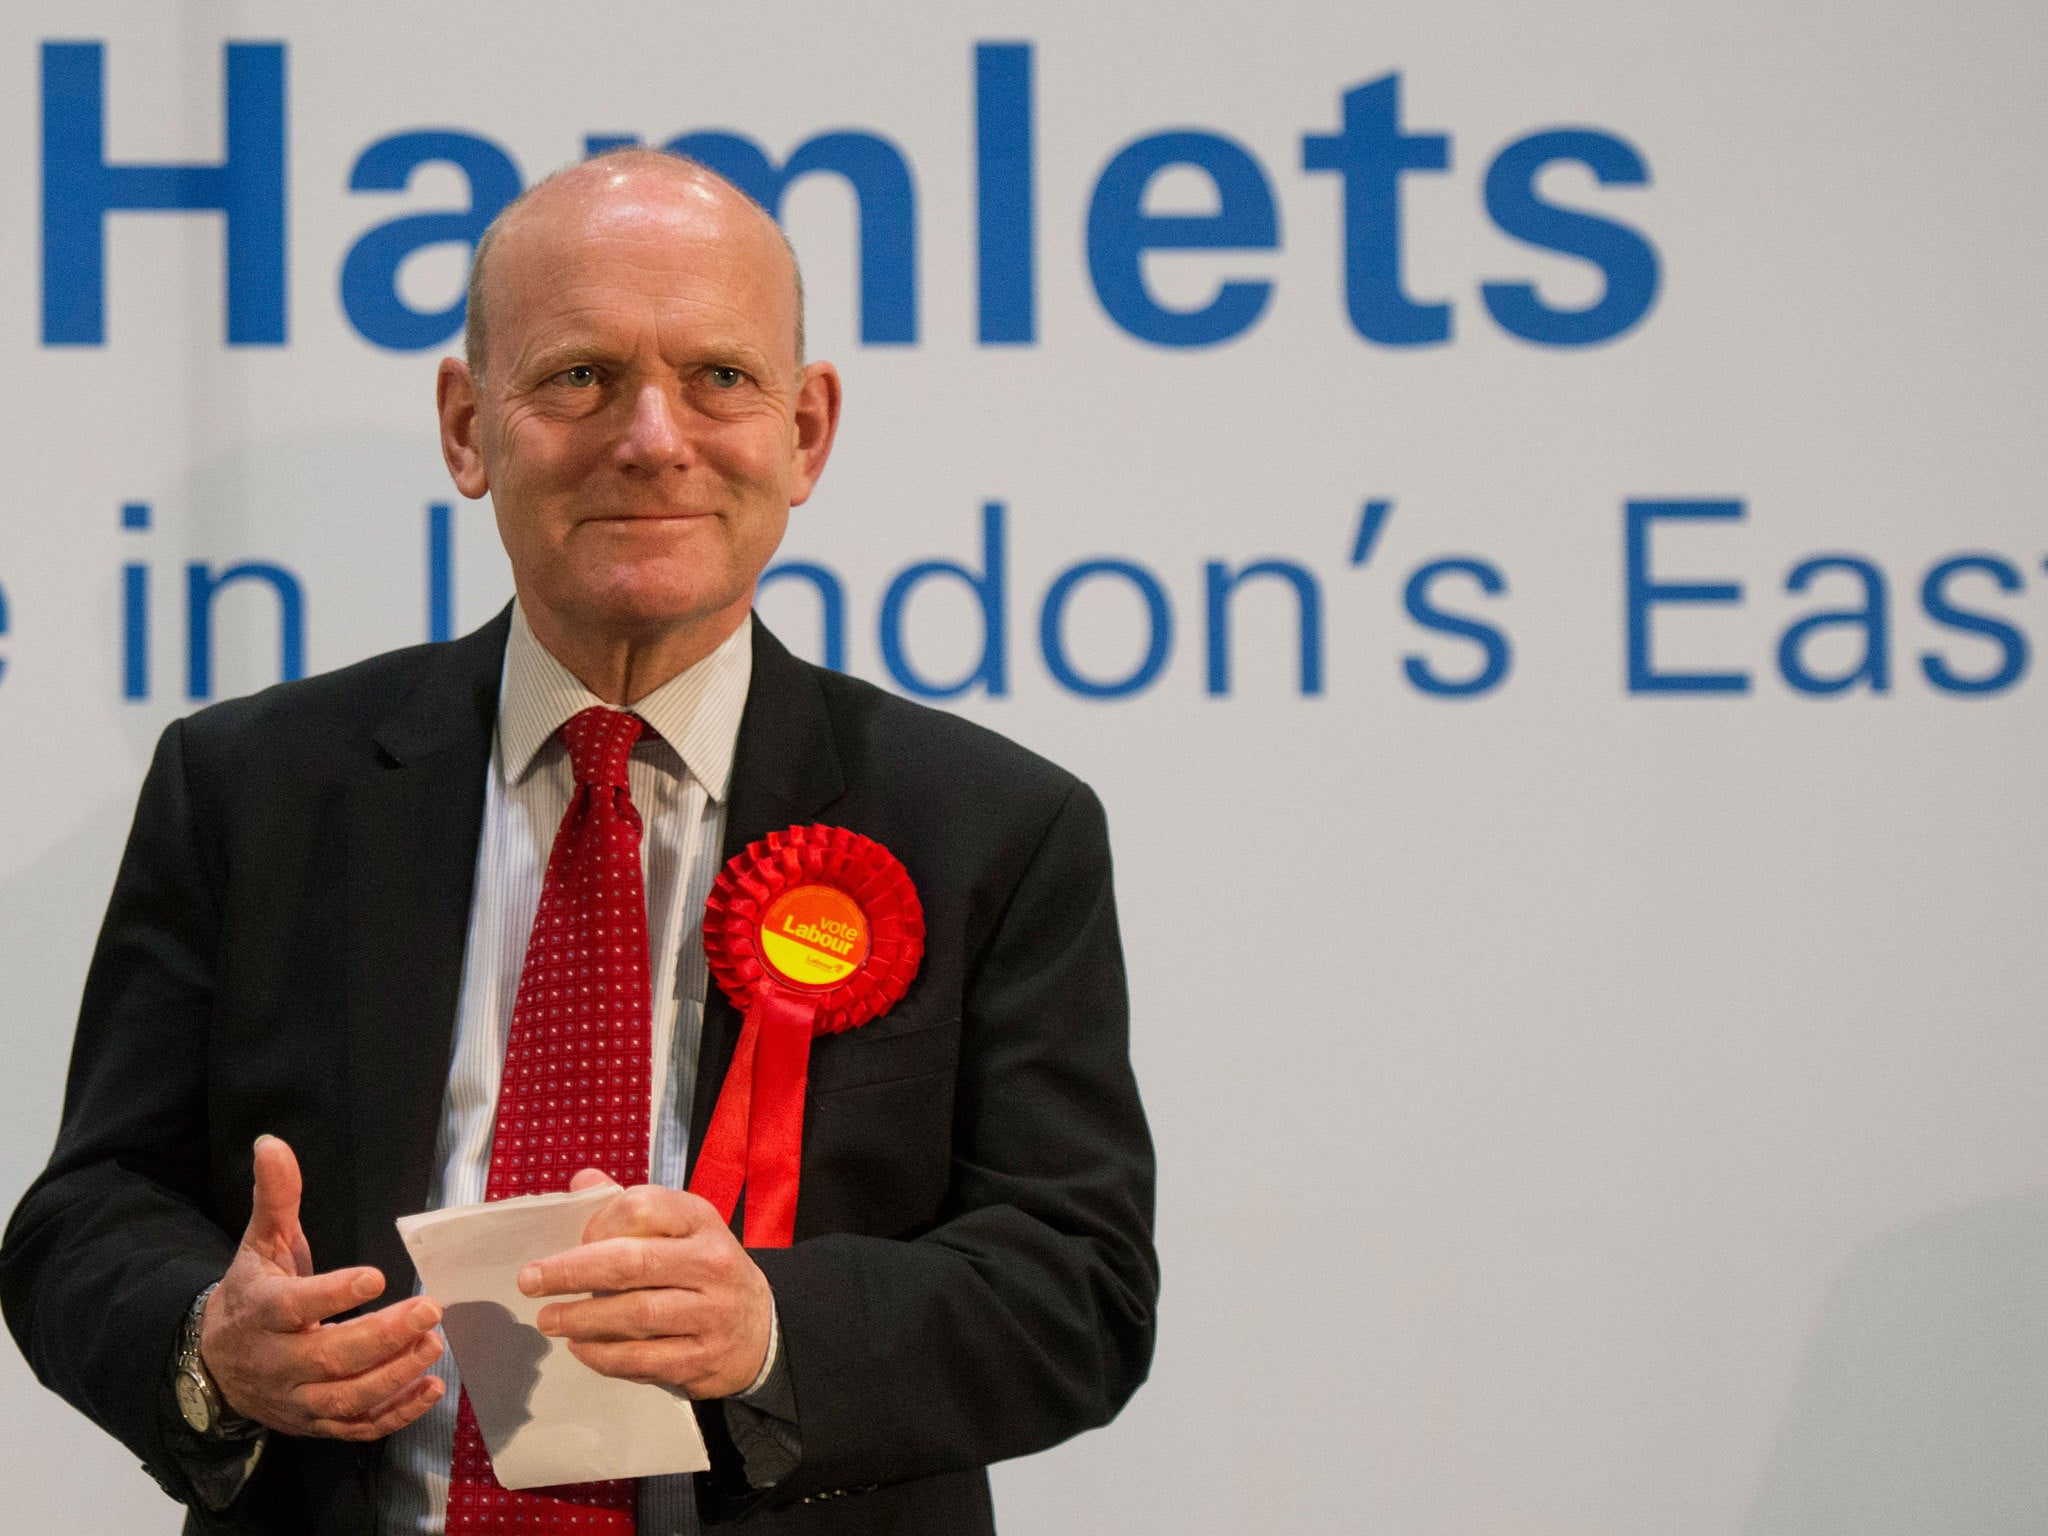 Labour's John Biggs has become the directly elected mayor of Tower Hamlets in a rerun election